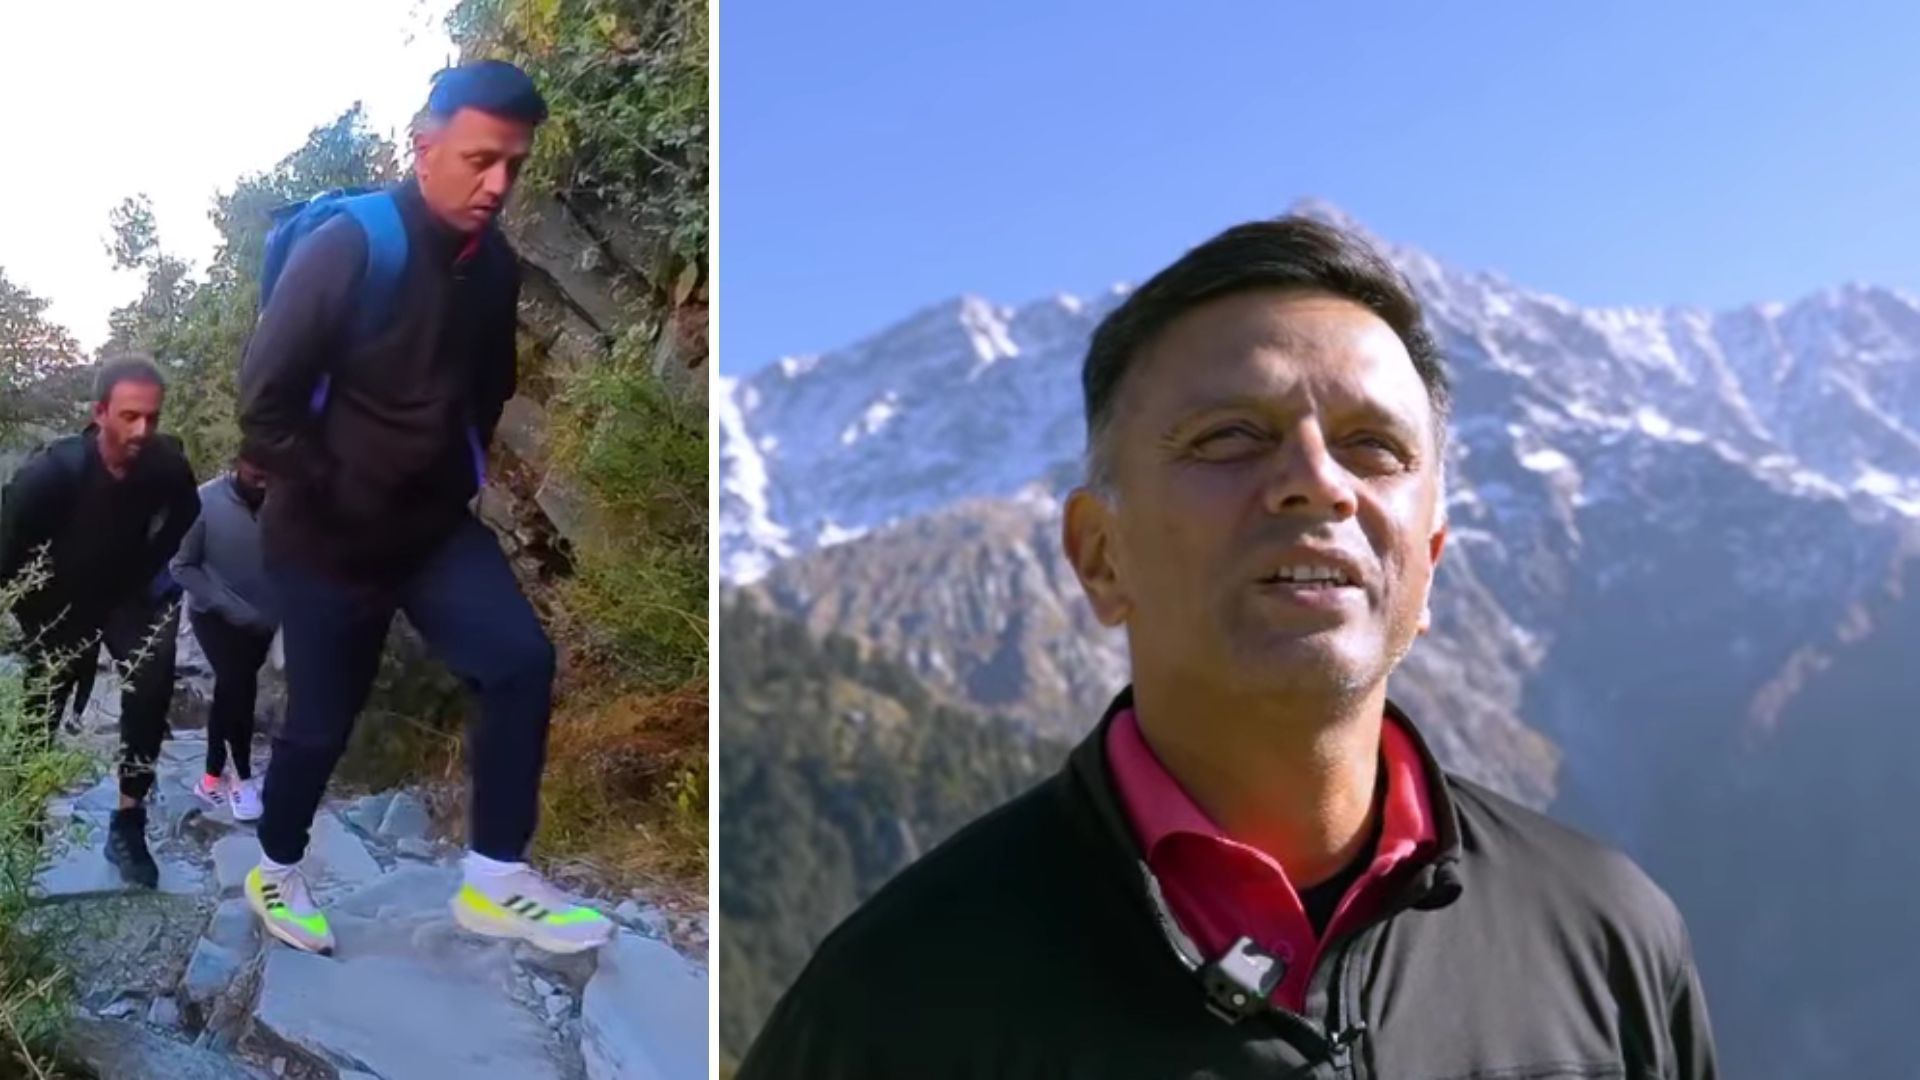 Snippets from the video posted by BCCI about the Indian support staff trekking